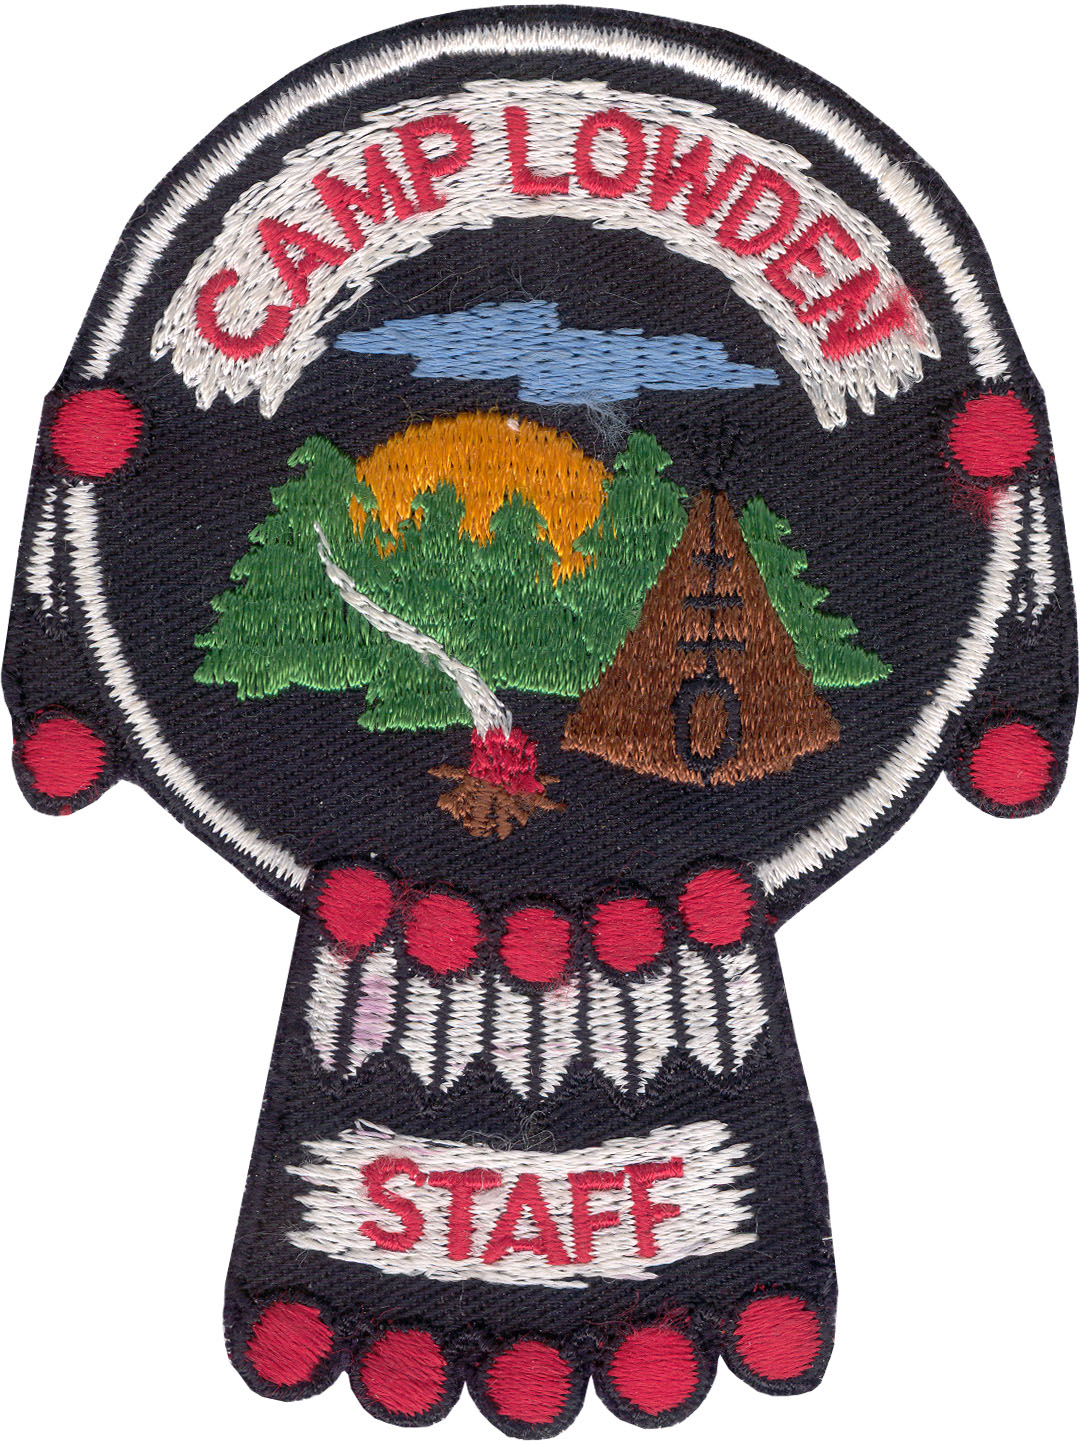 Details about   1973 Camp Rancho Allegre Camp Patch